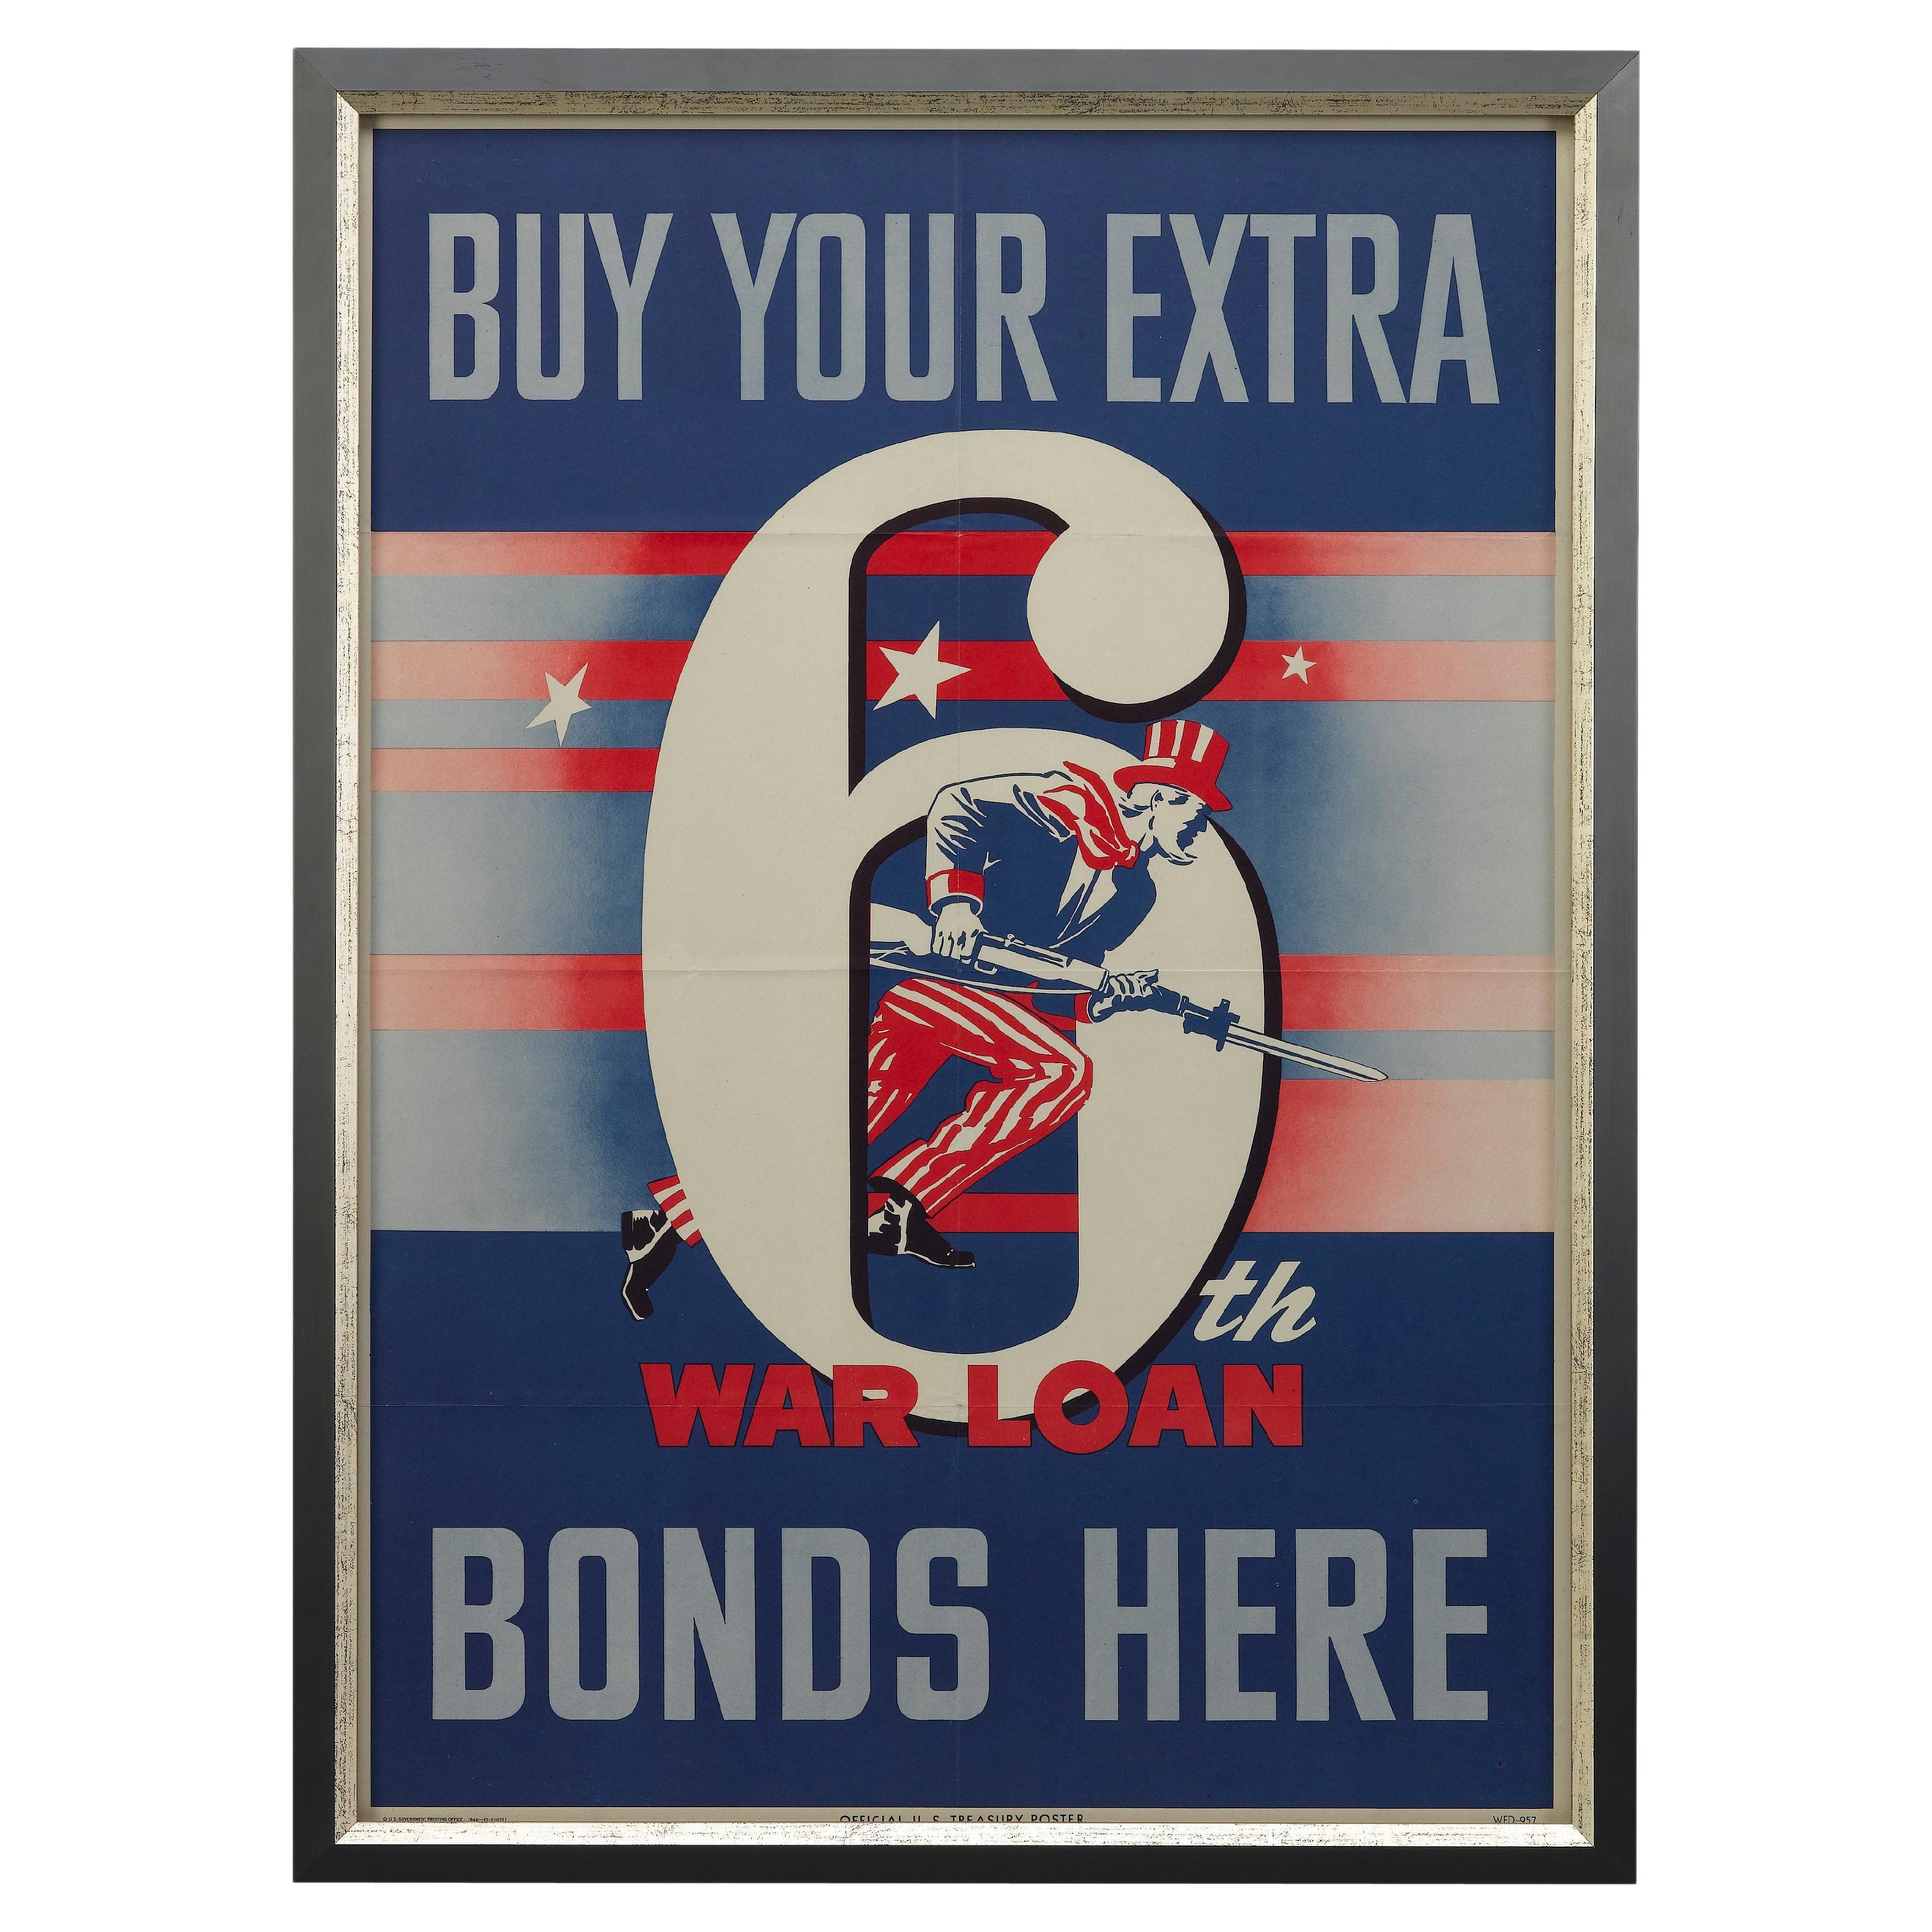 „“Buy Your Extra 6th War Loan Bonds Here““ Vintage-WWII-Poster, 1944 im Angebot